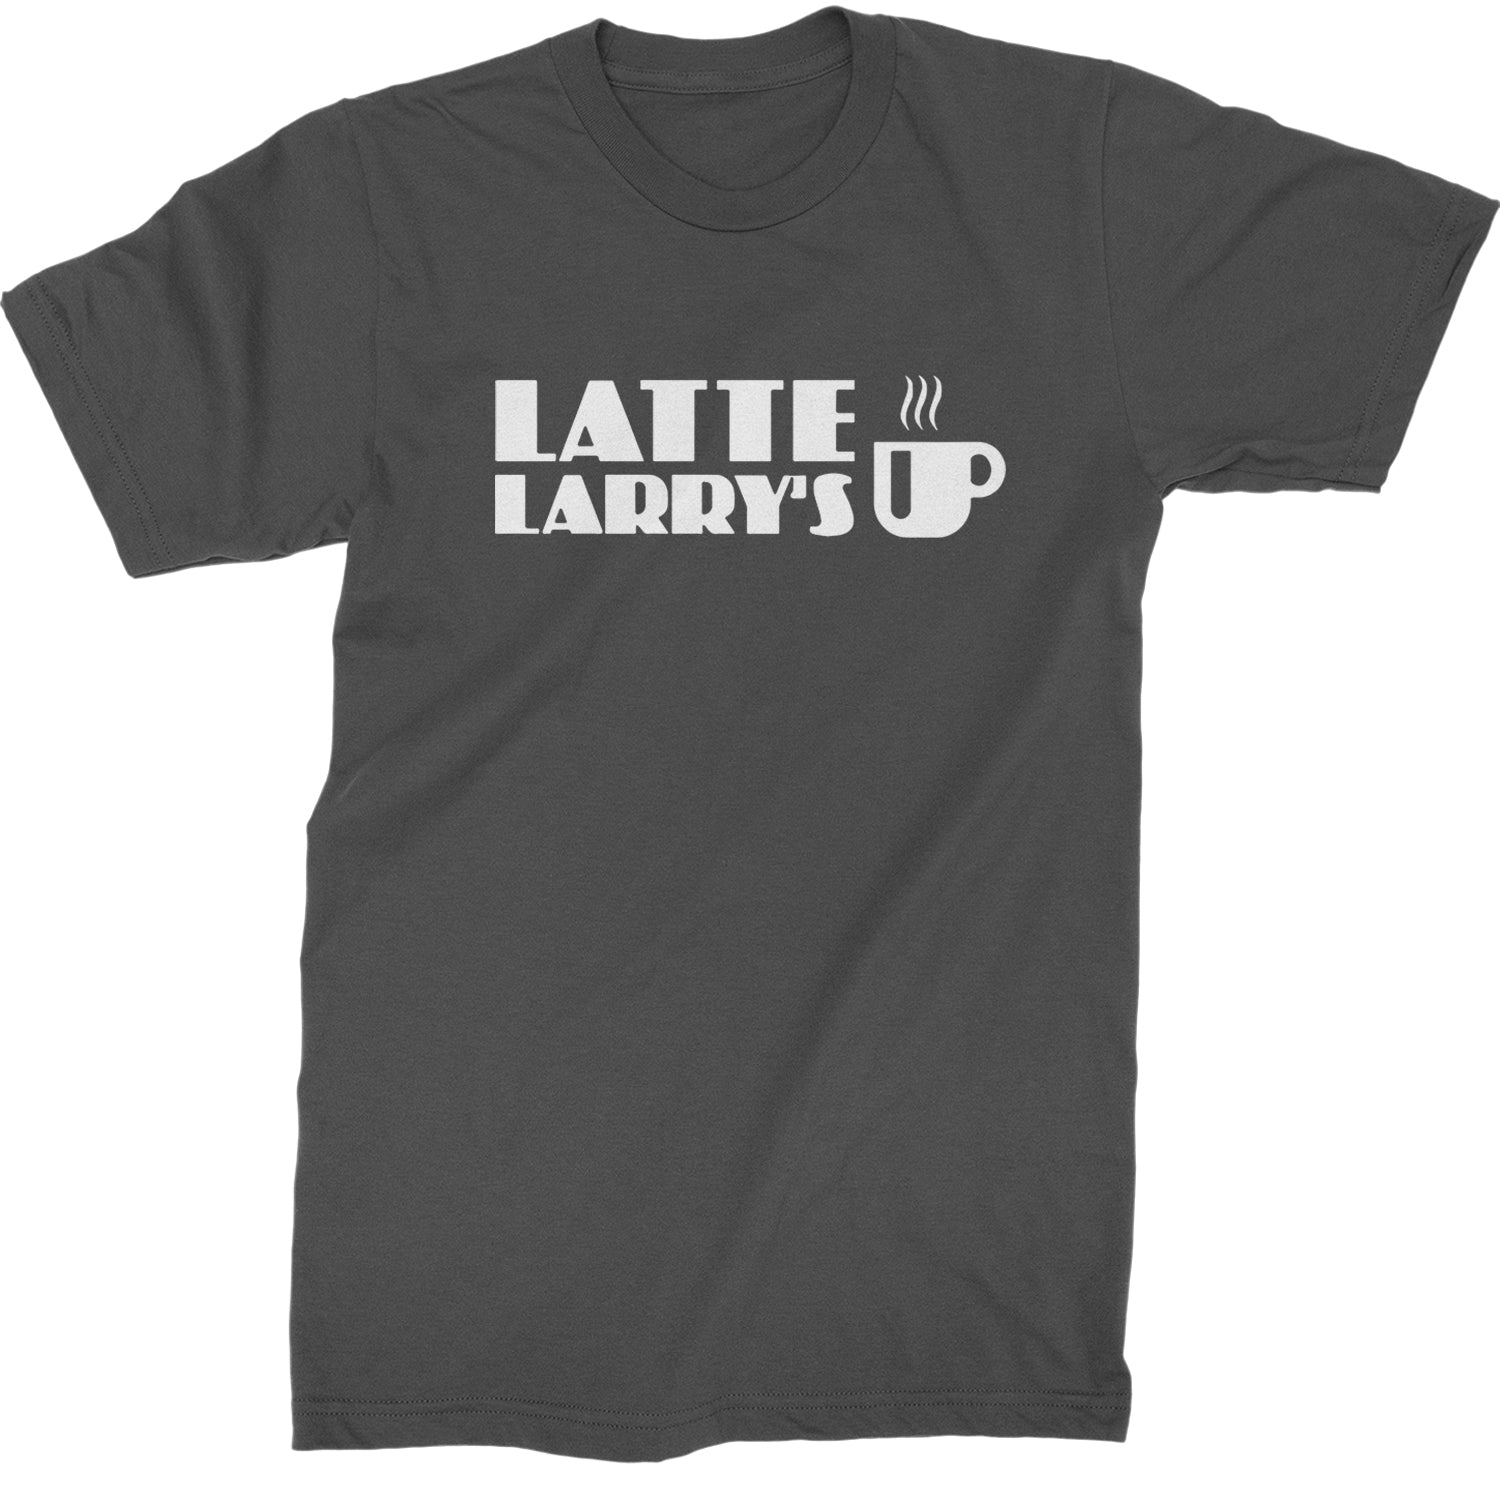 Latte Larry's Enthusiastic Coffee Mens T-shirt Charcoal Grey